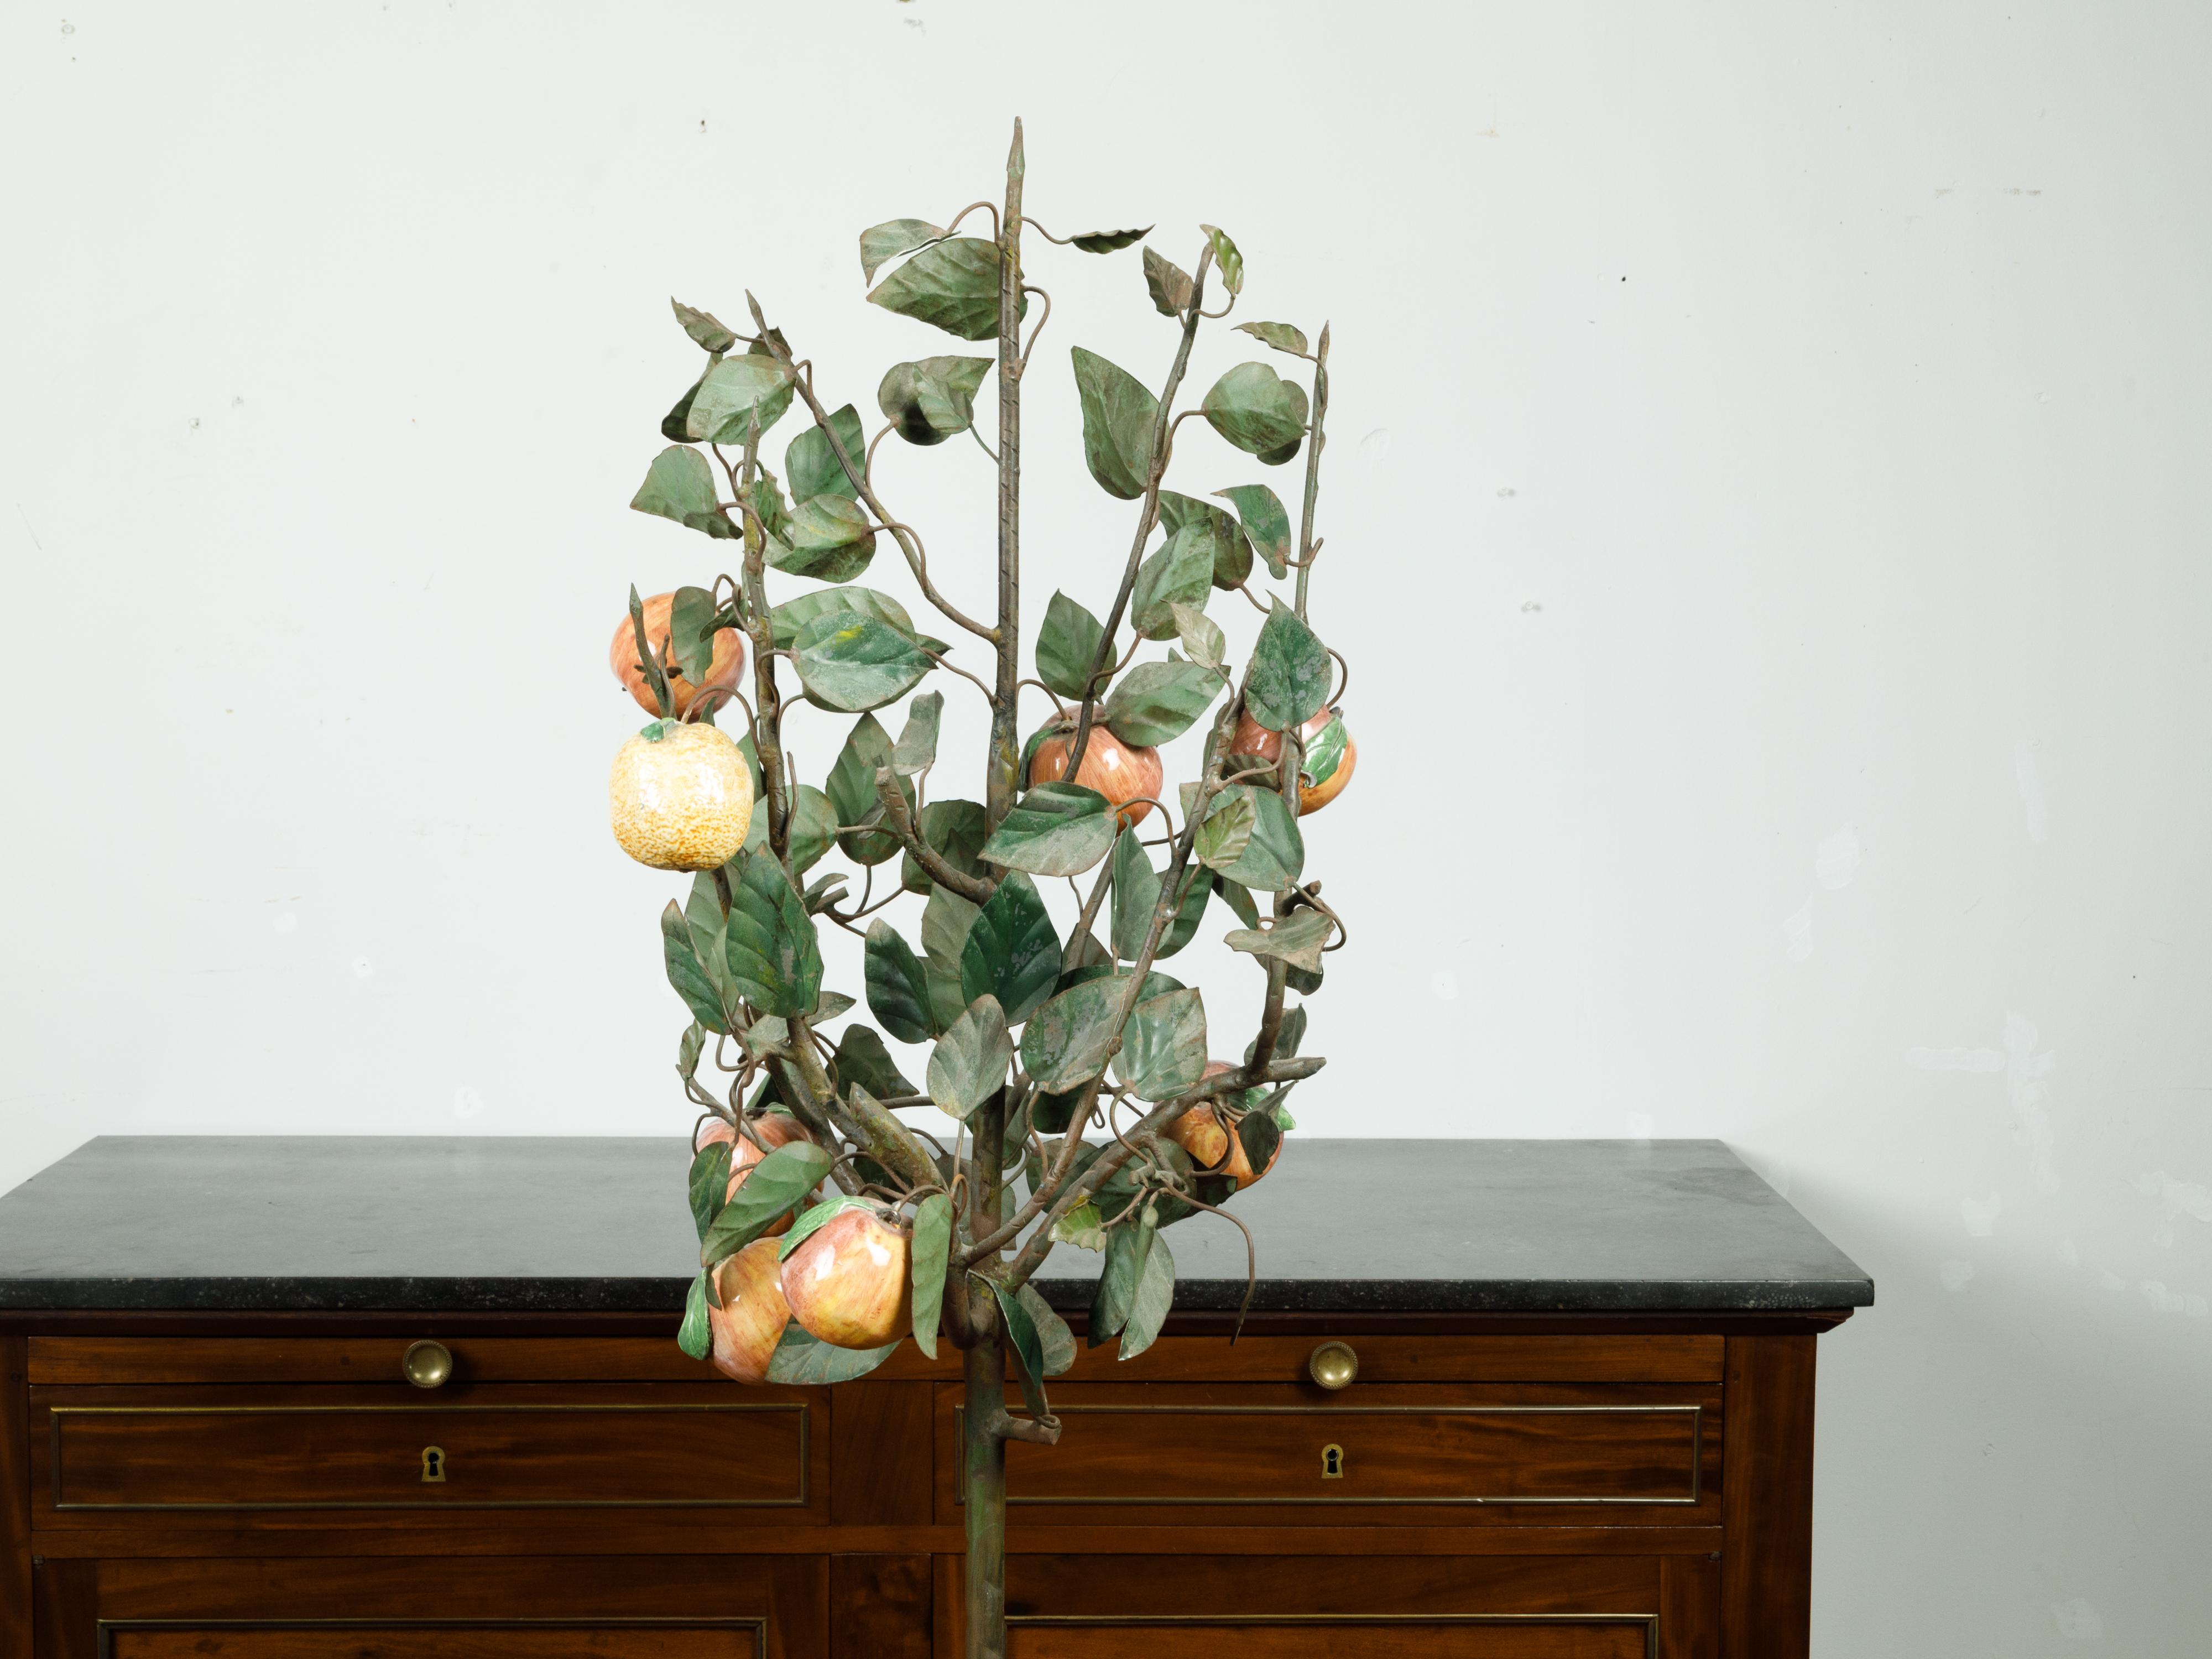 French 1930s Tôle and Glass Tree in Pot Sculpture with Orange and Yellow Fruits For Sale 5